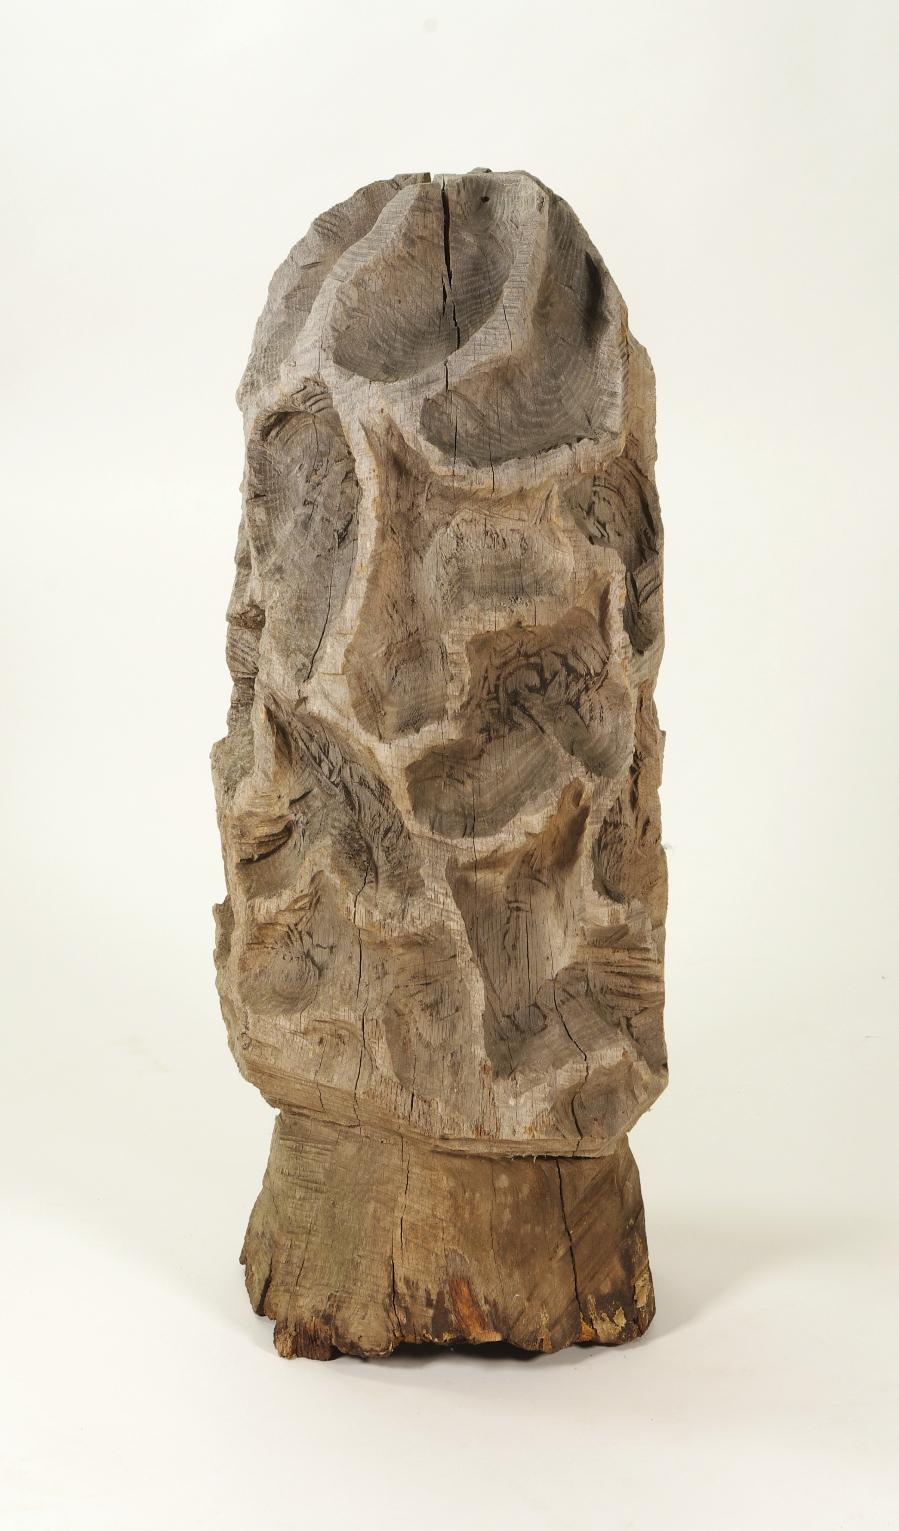 Folk art carved morel mushroom sculpture

The rough, uneven surface of this delightful sculpture suggests it was carved with a chain saw, possibly from a telephone pole.

The base, which has suffered from sitting on the ground, has been filled